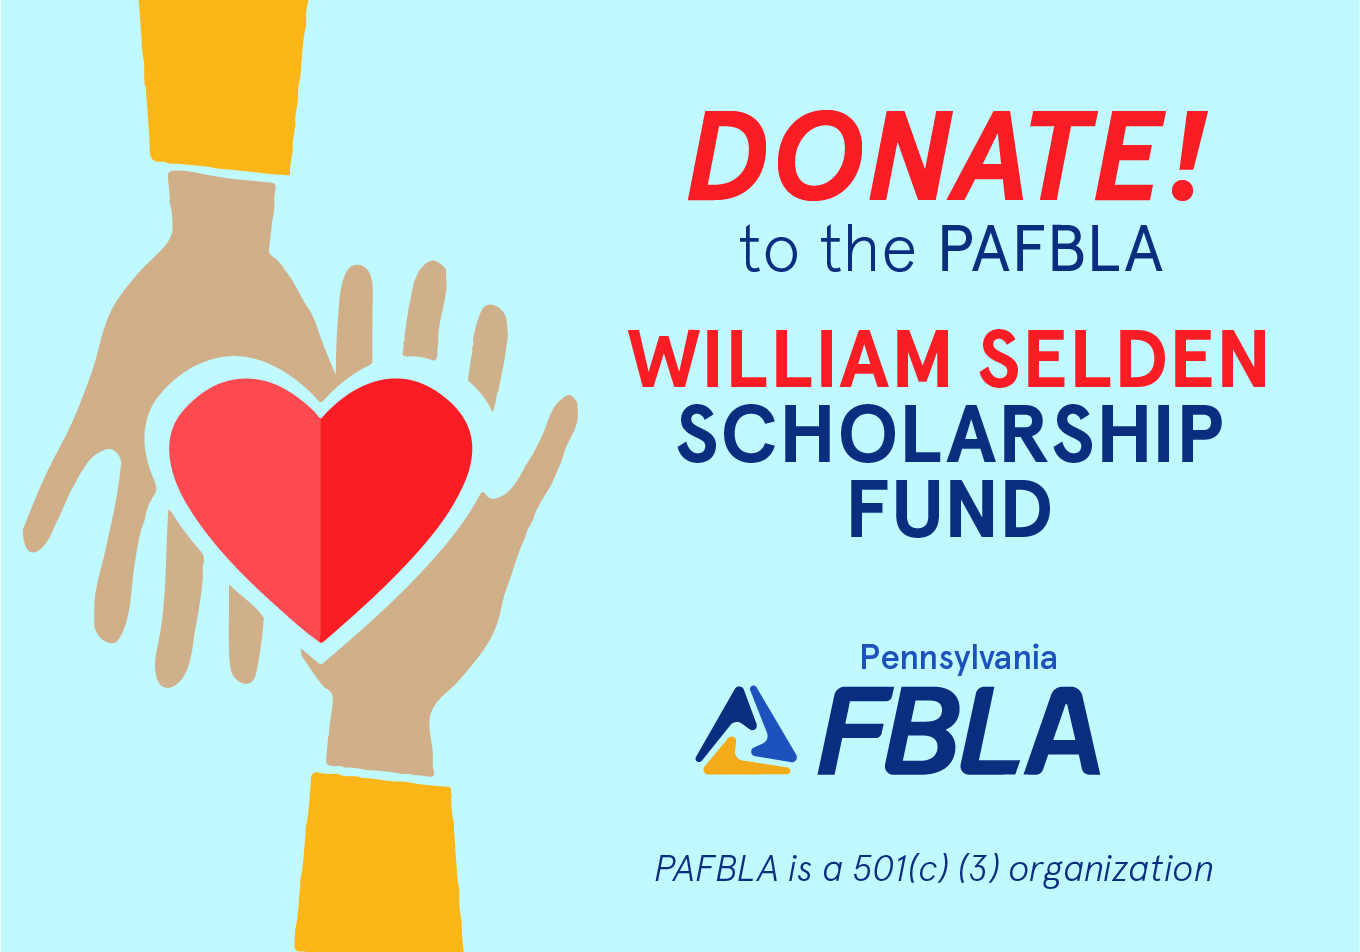 Donate to the William Selden Scholarship Fund